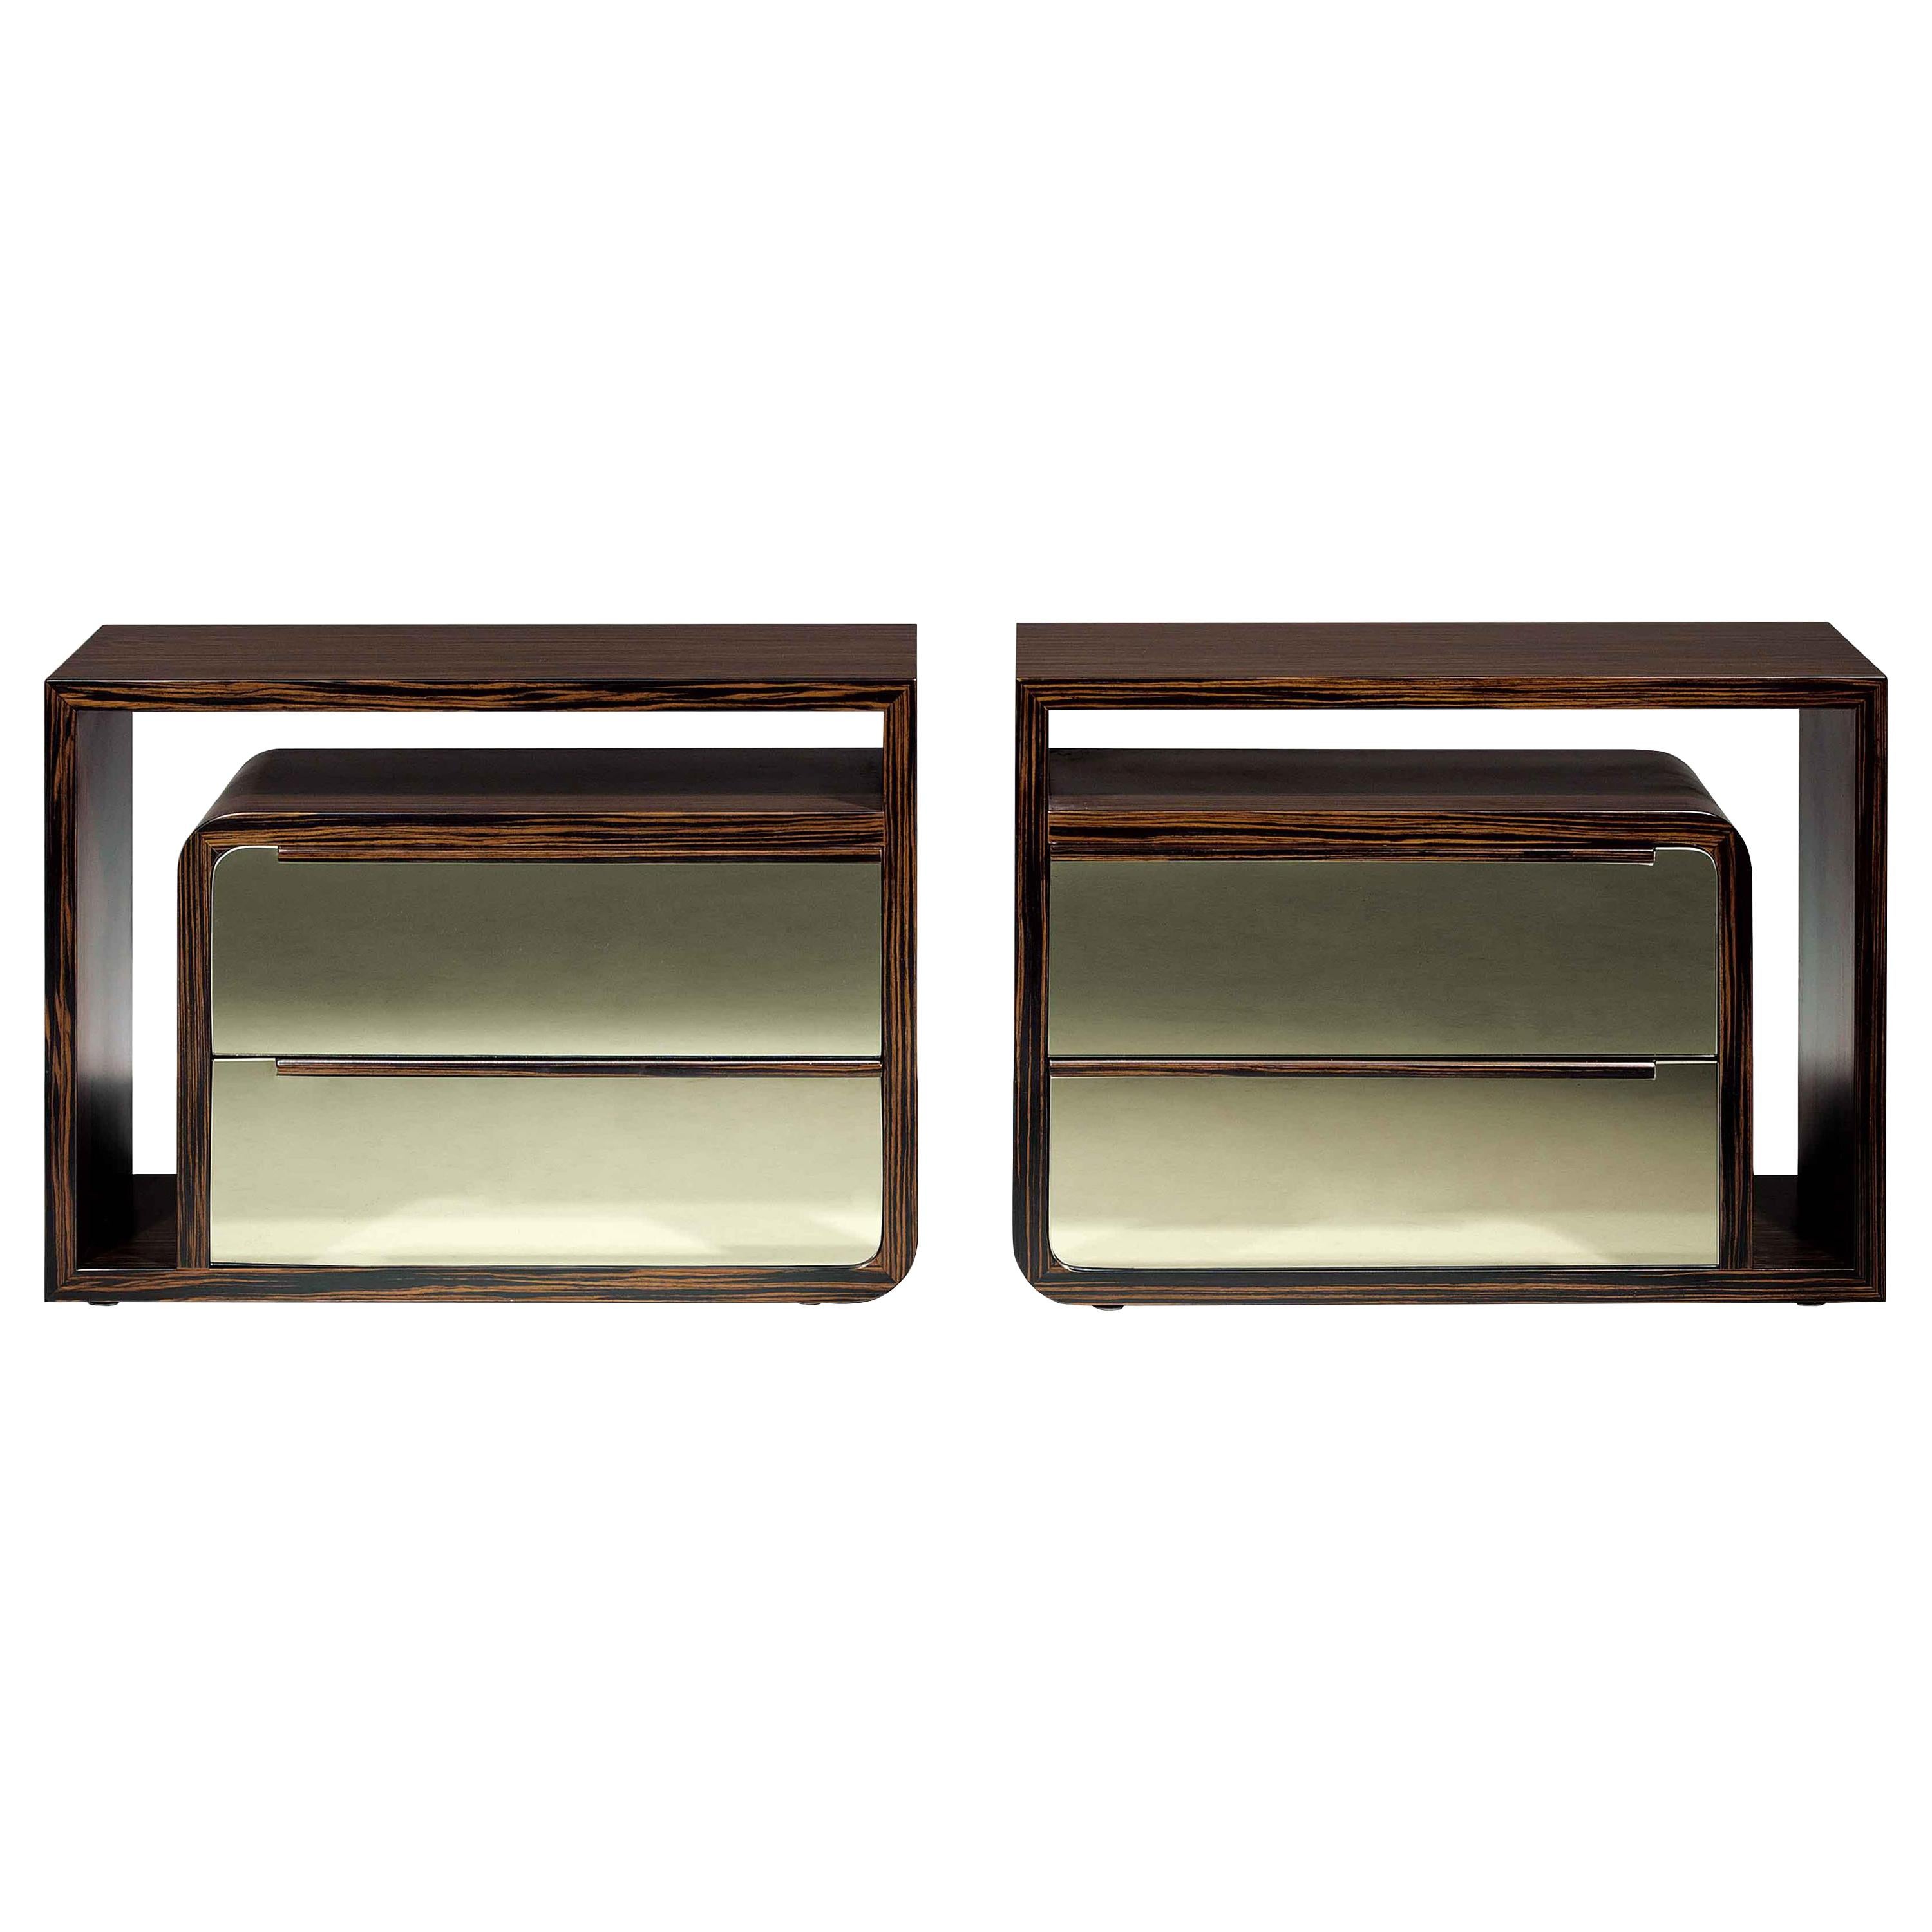 Rose Contemporary Bedside Table with Two Mirrored Drawers by Luísa Peixoto For Sale